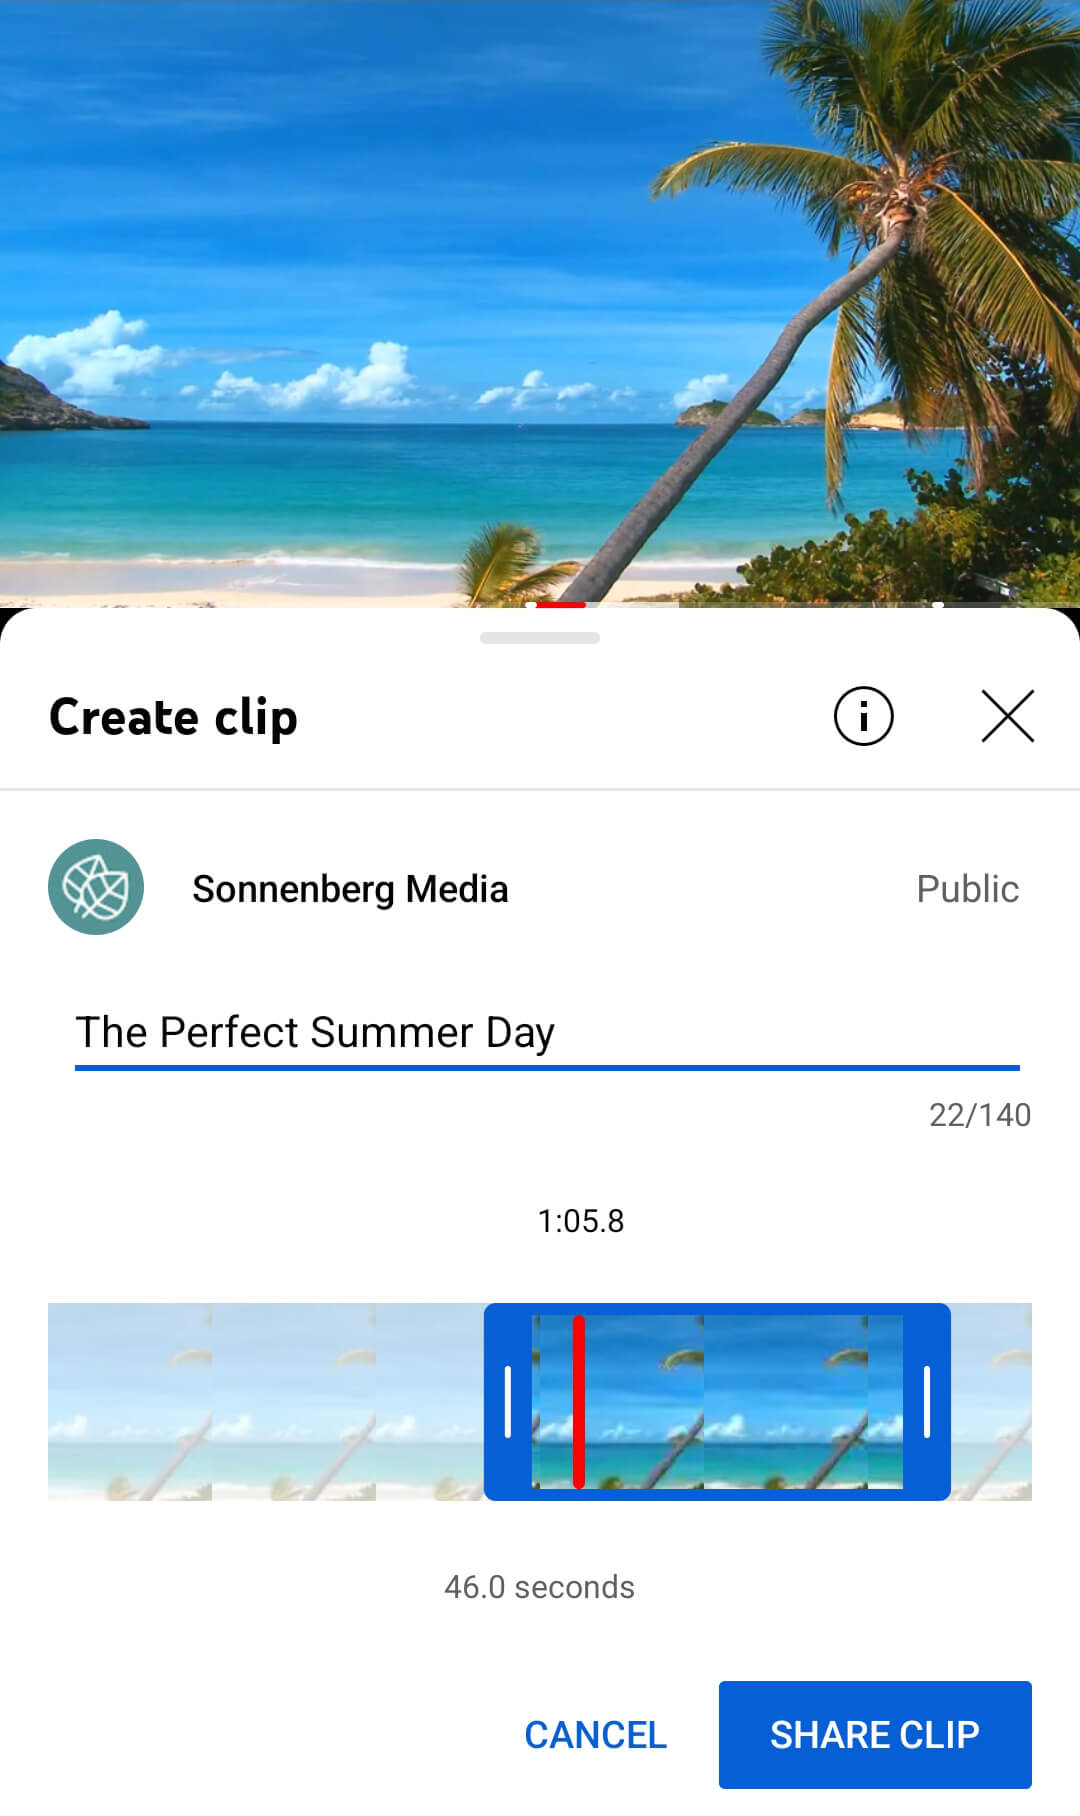 how-to-create-clips-youtube-own-video-content-share-clip-button-sonnenberg-mediastep-7